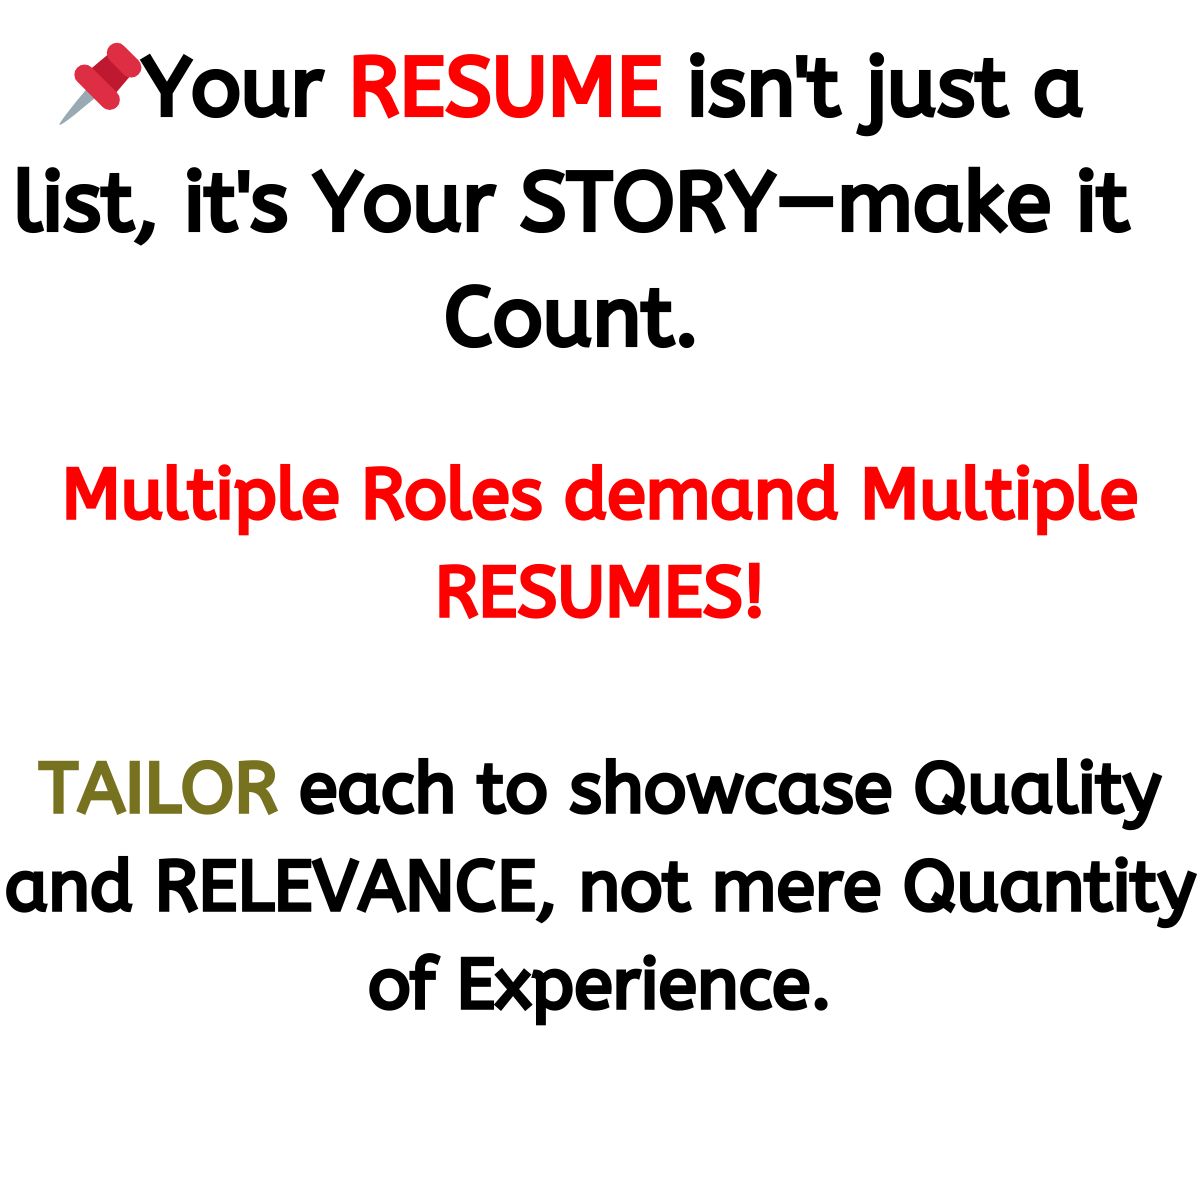 Job hunting is a full-time gig! Need a boost? 

📄 My resume template: 80K+ downloads, Fortune 500 COMPANIES approved. 

🎁 Get it FREE↴

—Follow @ATSResumeWriter
—DM 'TEMPLATE'
—Receive in 2-4 hrs

#JobSearch #ResumeTips #CareerSuccess